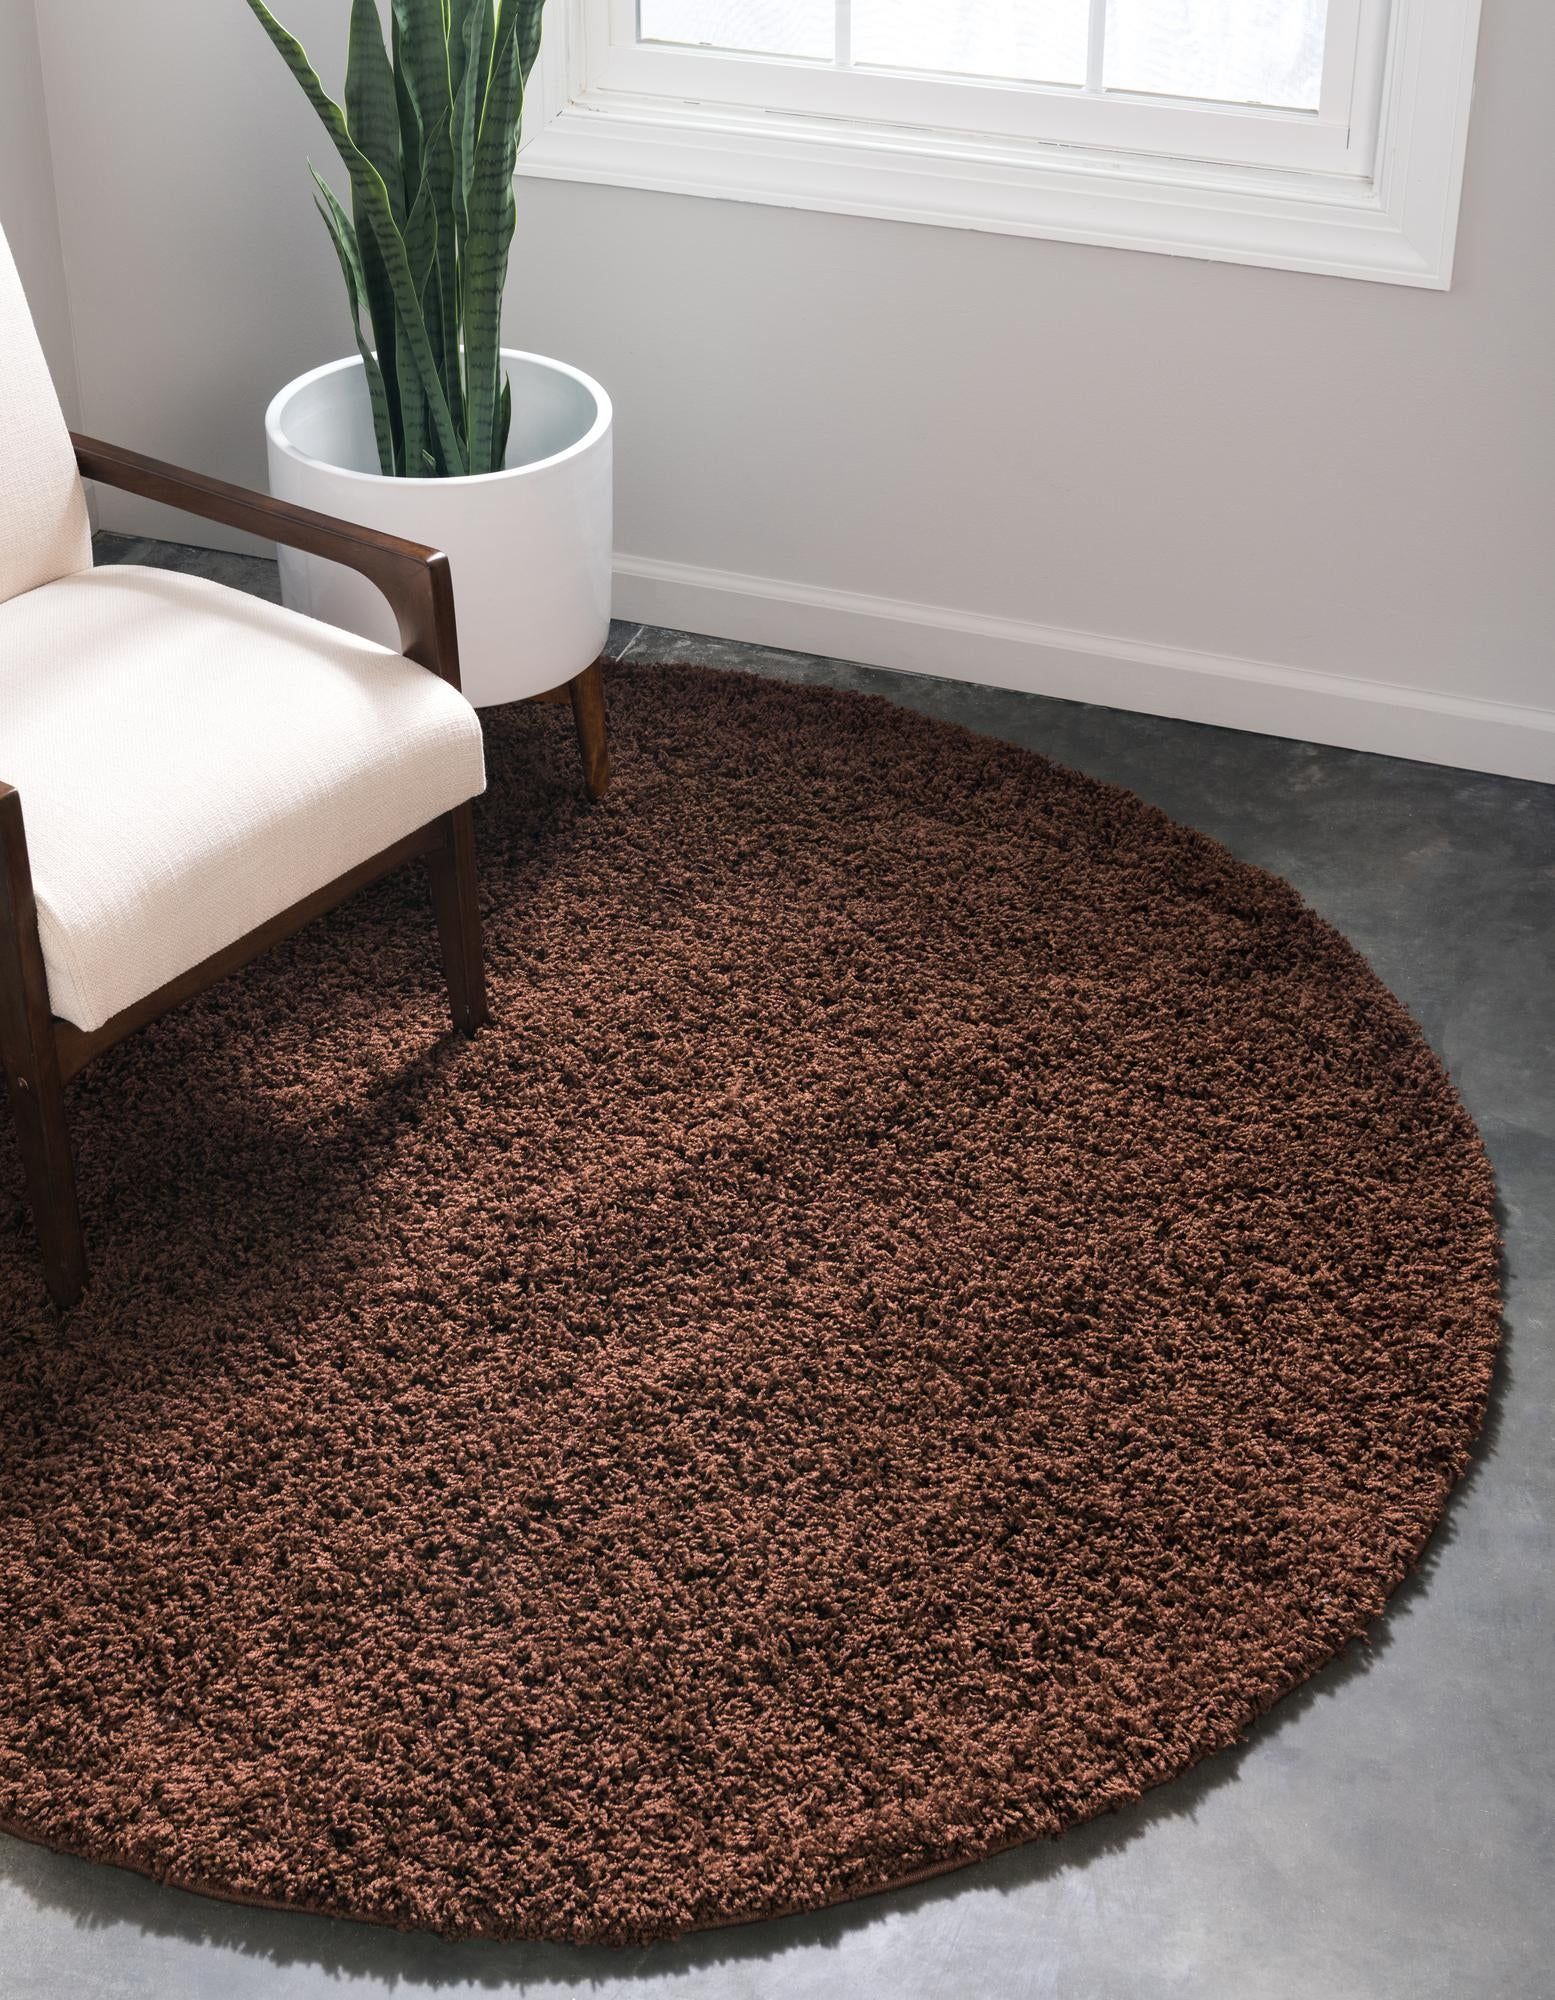 Chocolate Brown 4' X 4' Solid Shag Round Rug | Handknotted For Solid Shag Round Rugs (View 13 of 15)